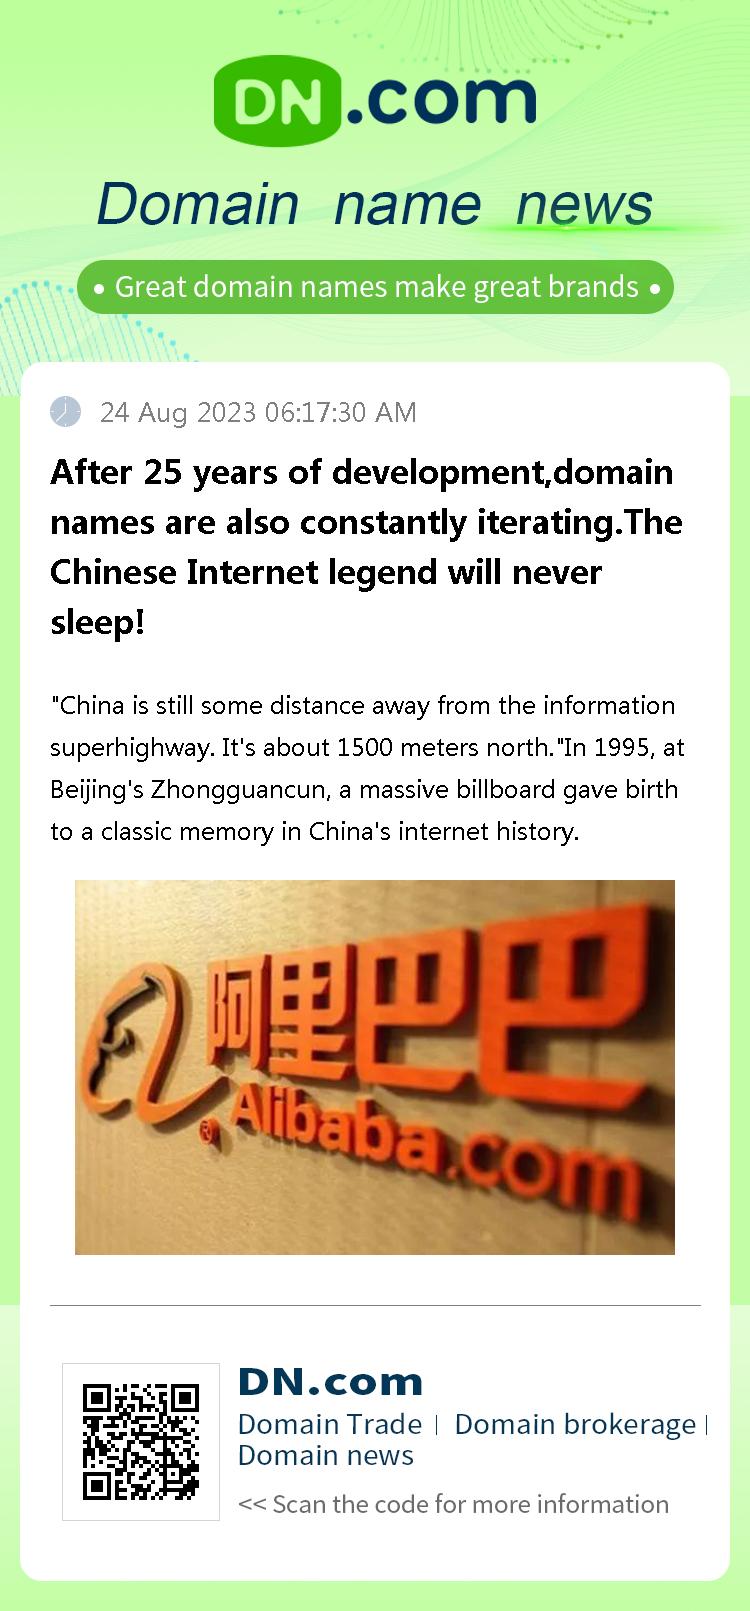 After 25 years of development,domain names are also constantly iterating.The Chinese Internet legend will never sleep!